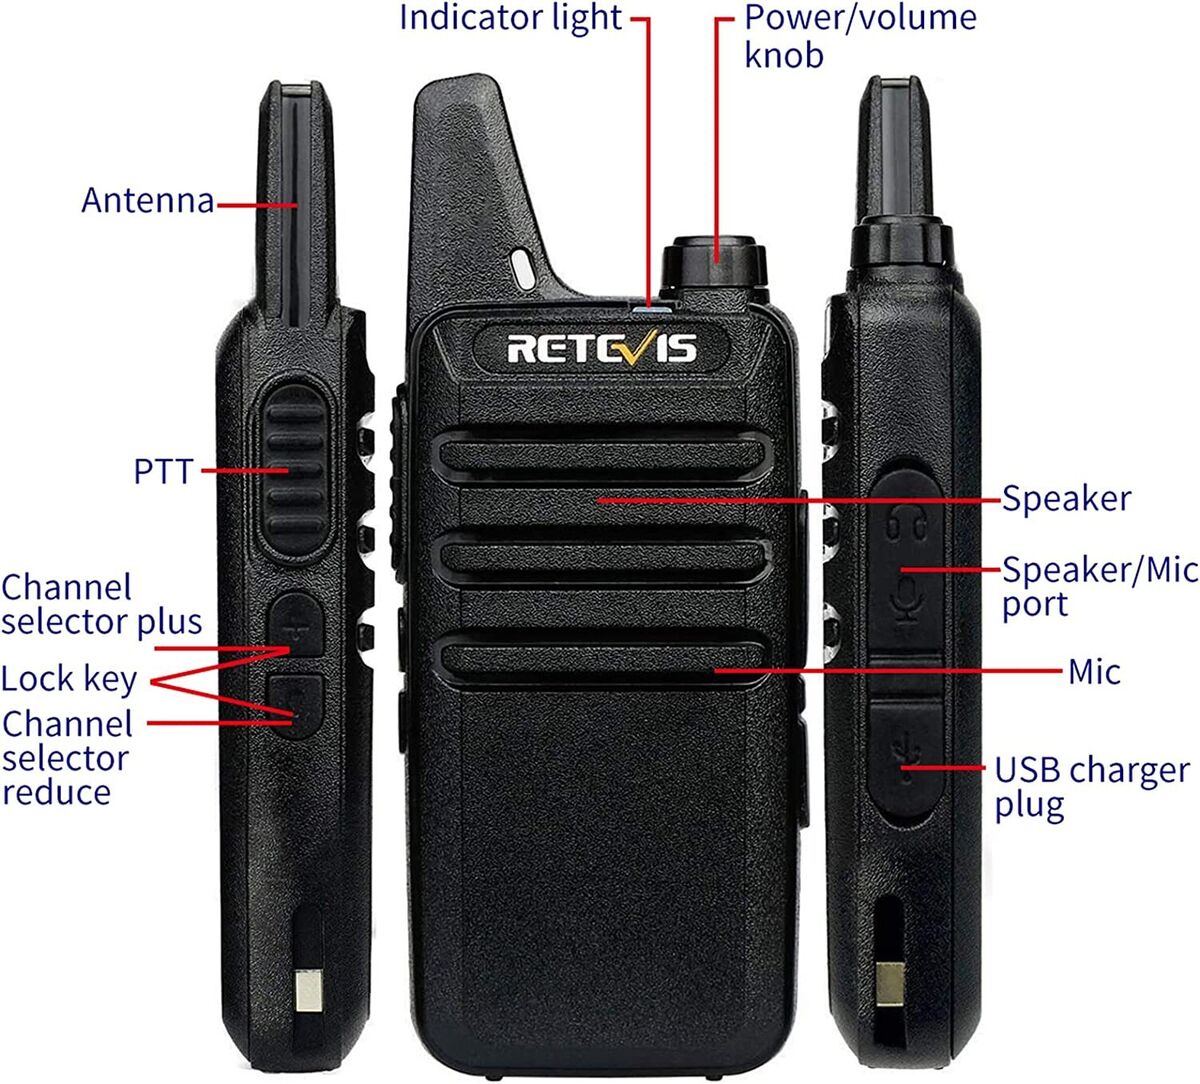 2Pack Retevis RT22 UHF Walkie Talkies Two Way Radio 2W CTCSS/DCS VOX For  Family eBay